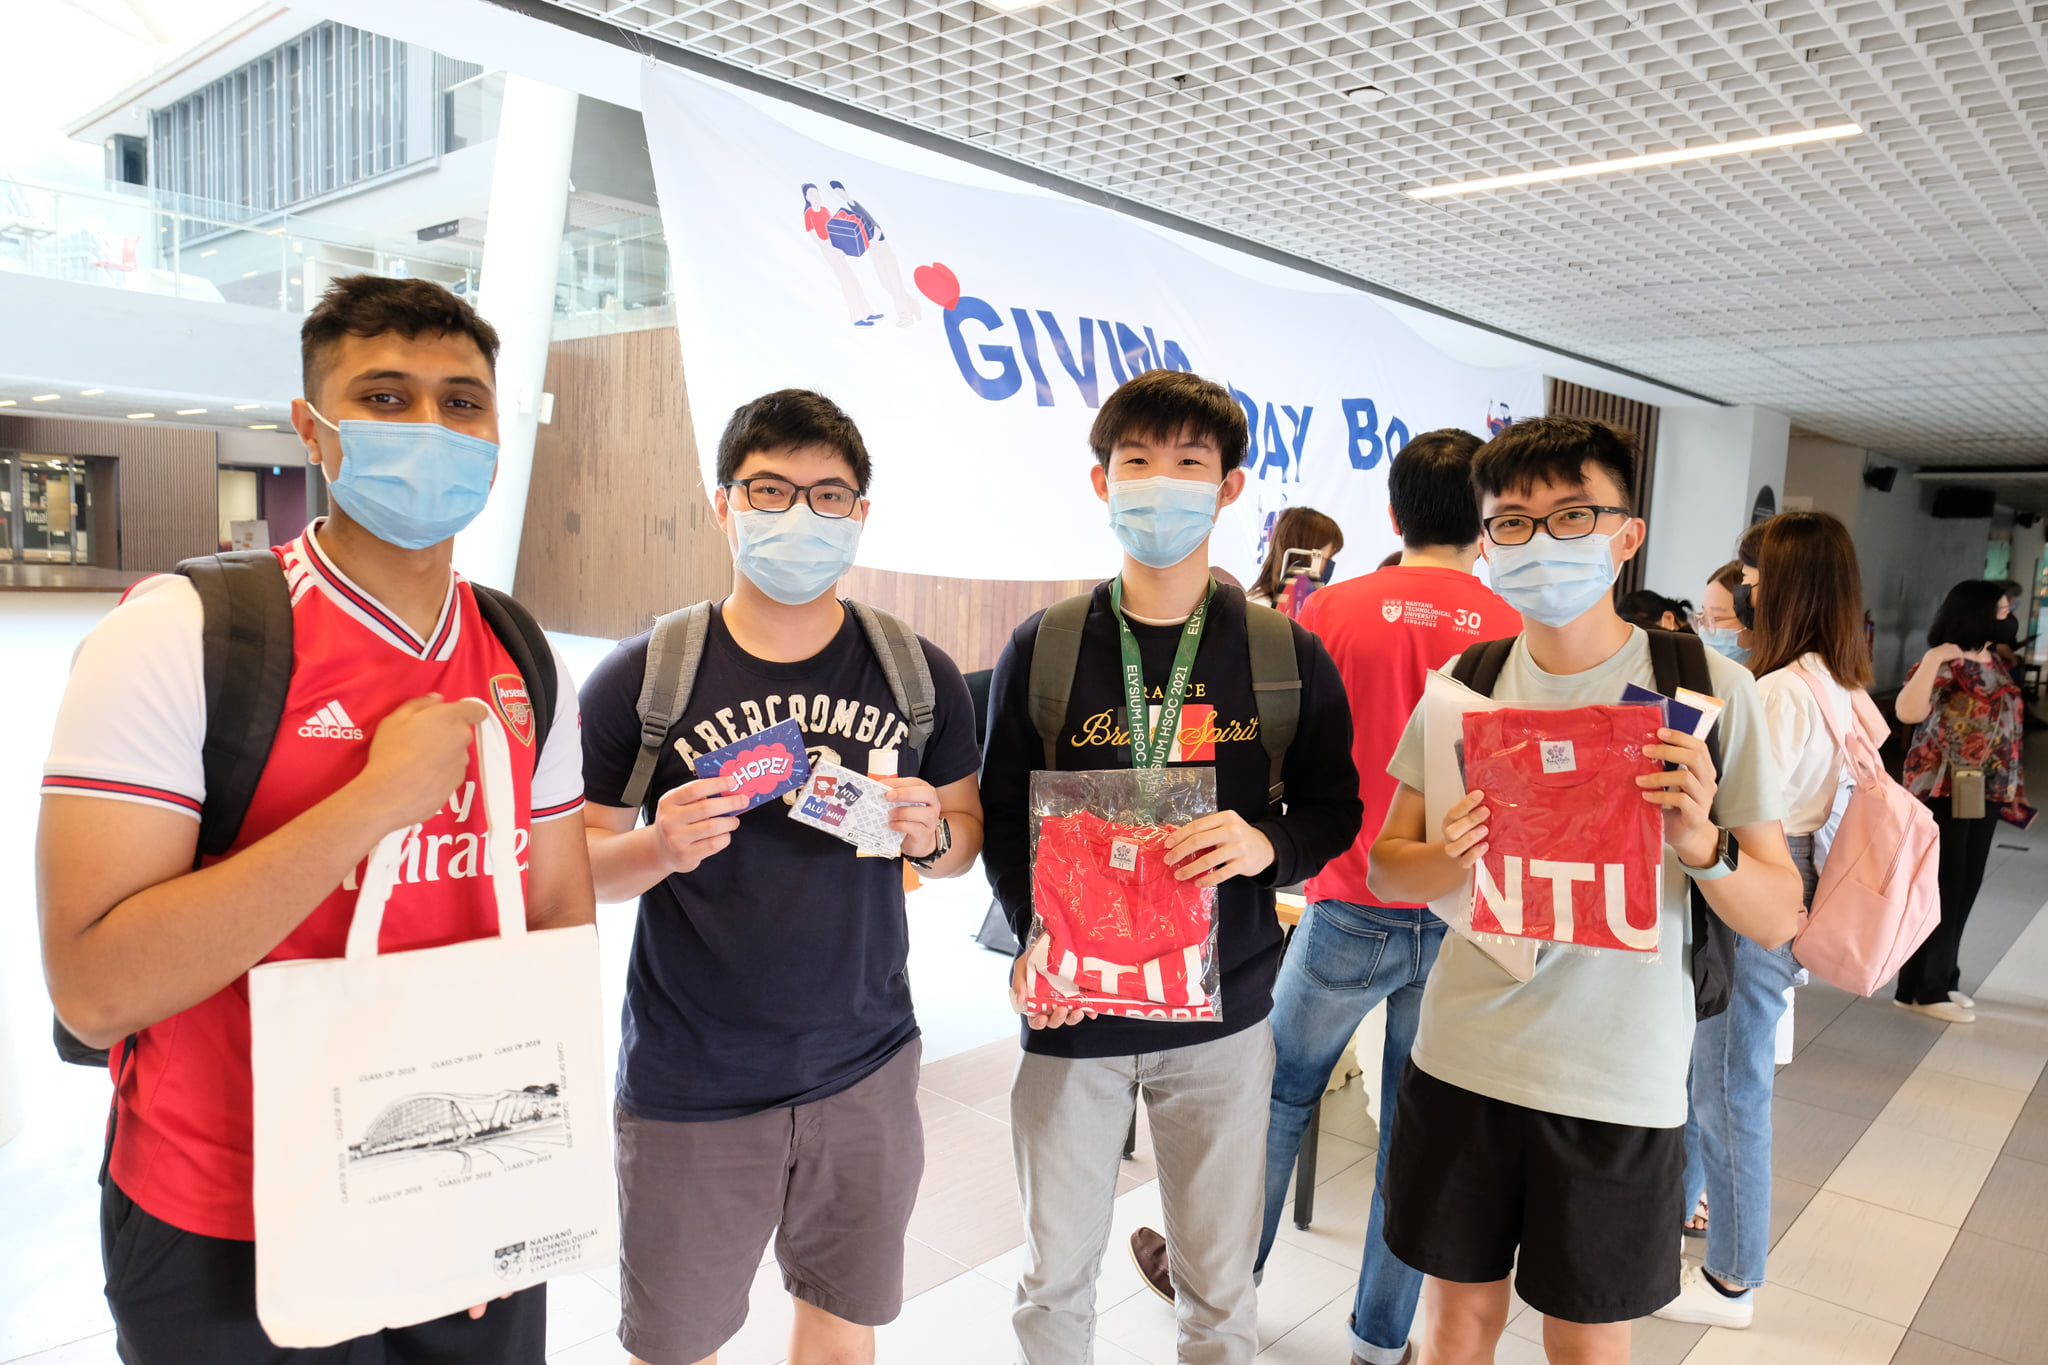 Students supporting NTU’s inaugural Giving Day on 23 March.